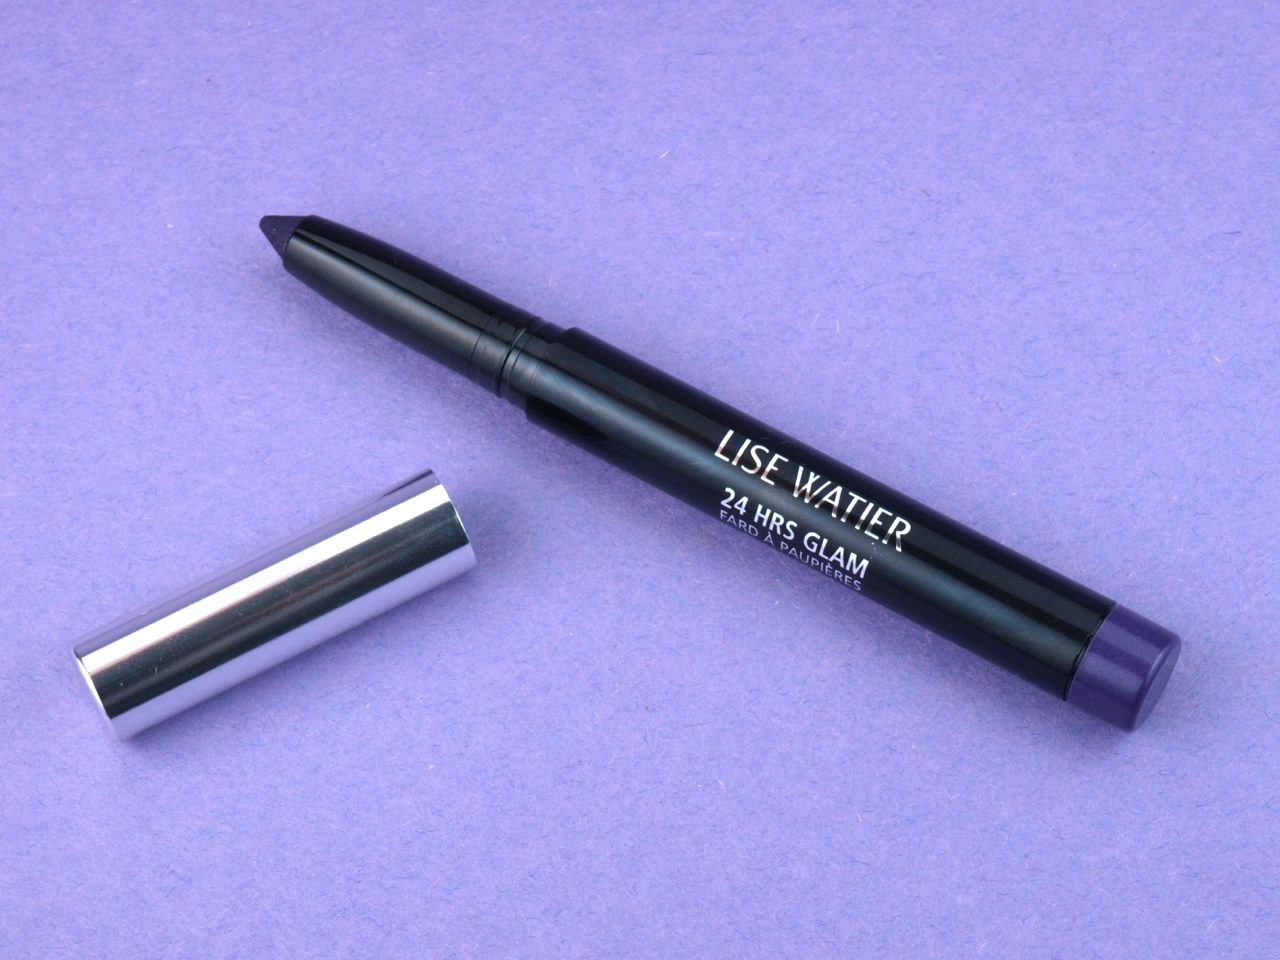 Lise Watier Fall 2014 24Hrs Glam Eyeshadow in Disco Glam Review Swatches